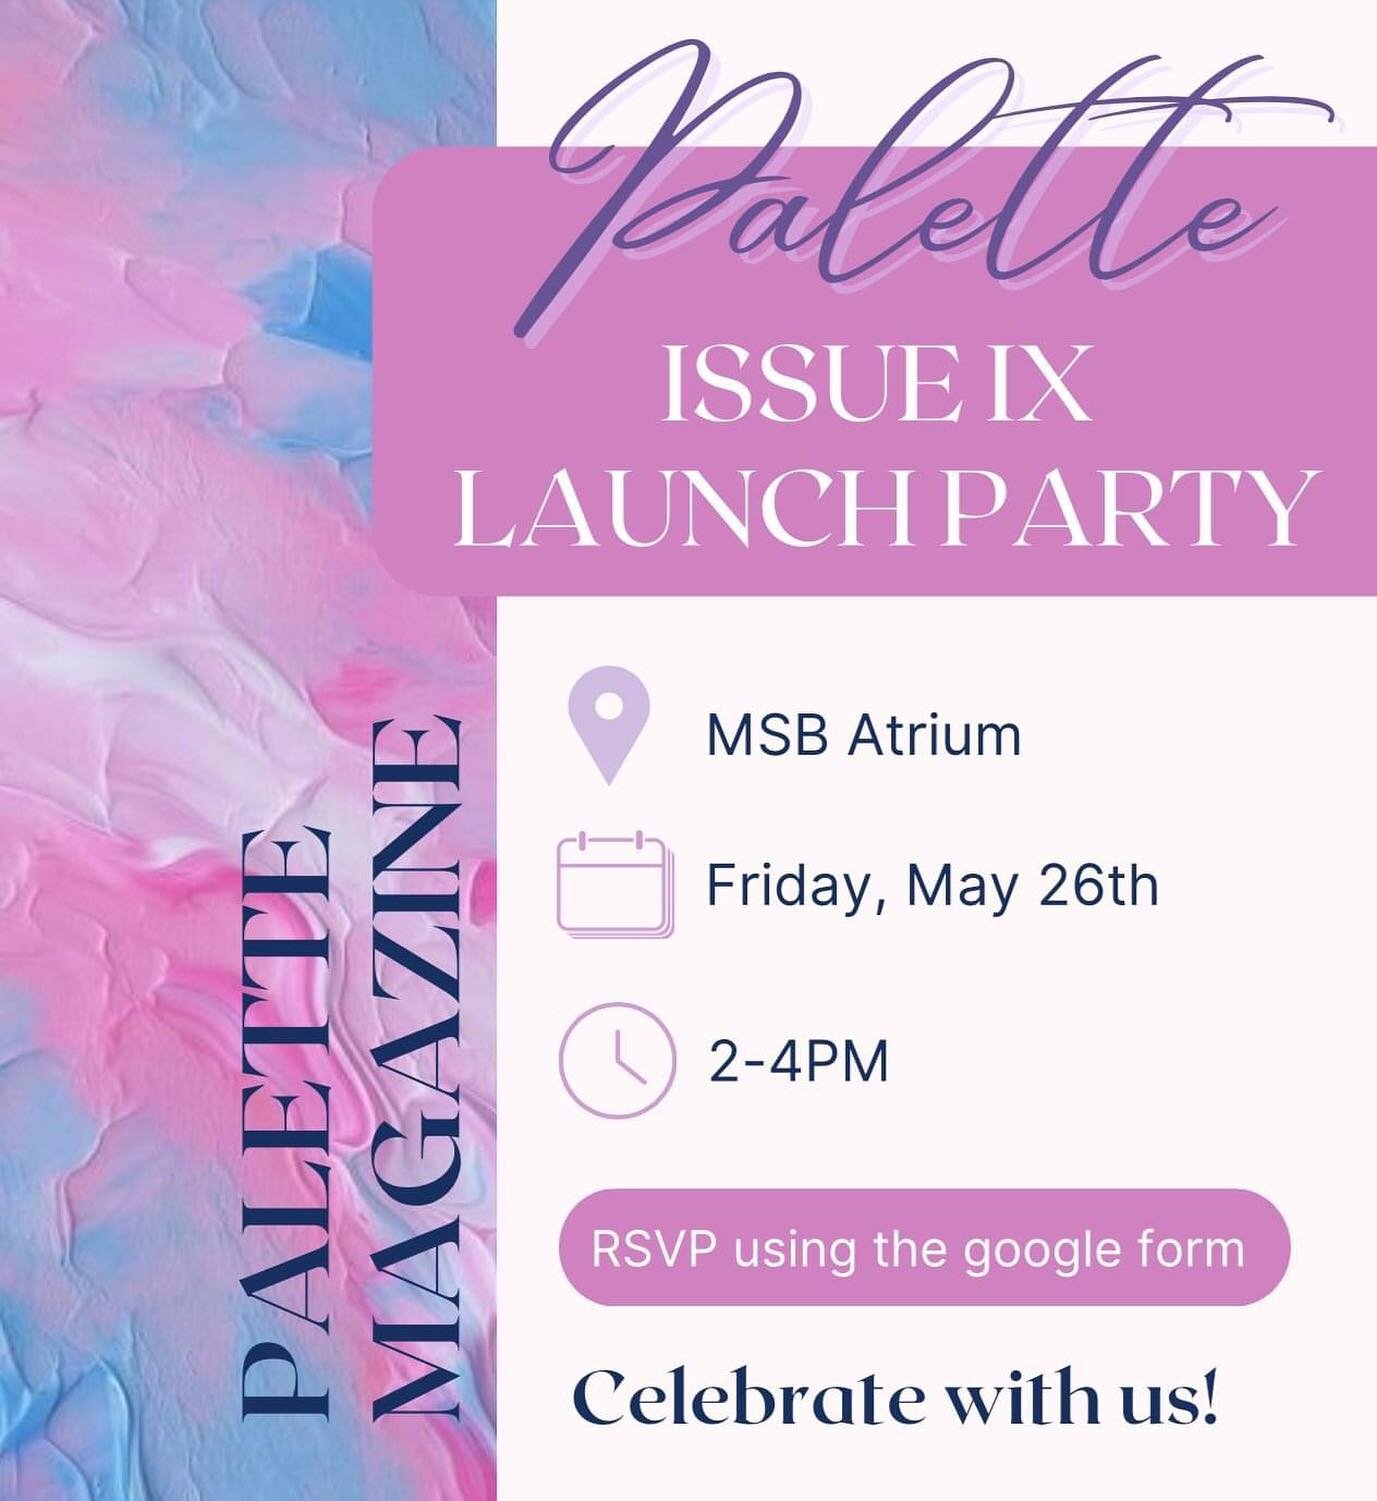 TL;DR Palette Magazine Issue IX Launch Event/Party on Friday, May 26th from 2-4PM in MSB Atrium! RSVP link in bio🎉

Join us in celebrating the release of Issue IX, where we showcase the vibrant talents and inspiring stories of the UofT Medicine comm